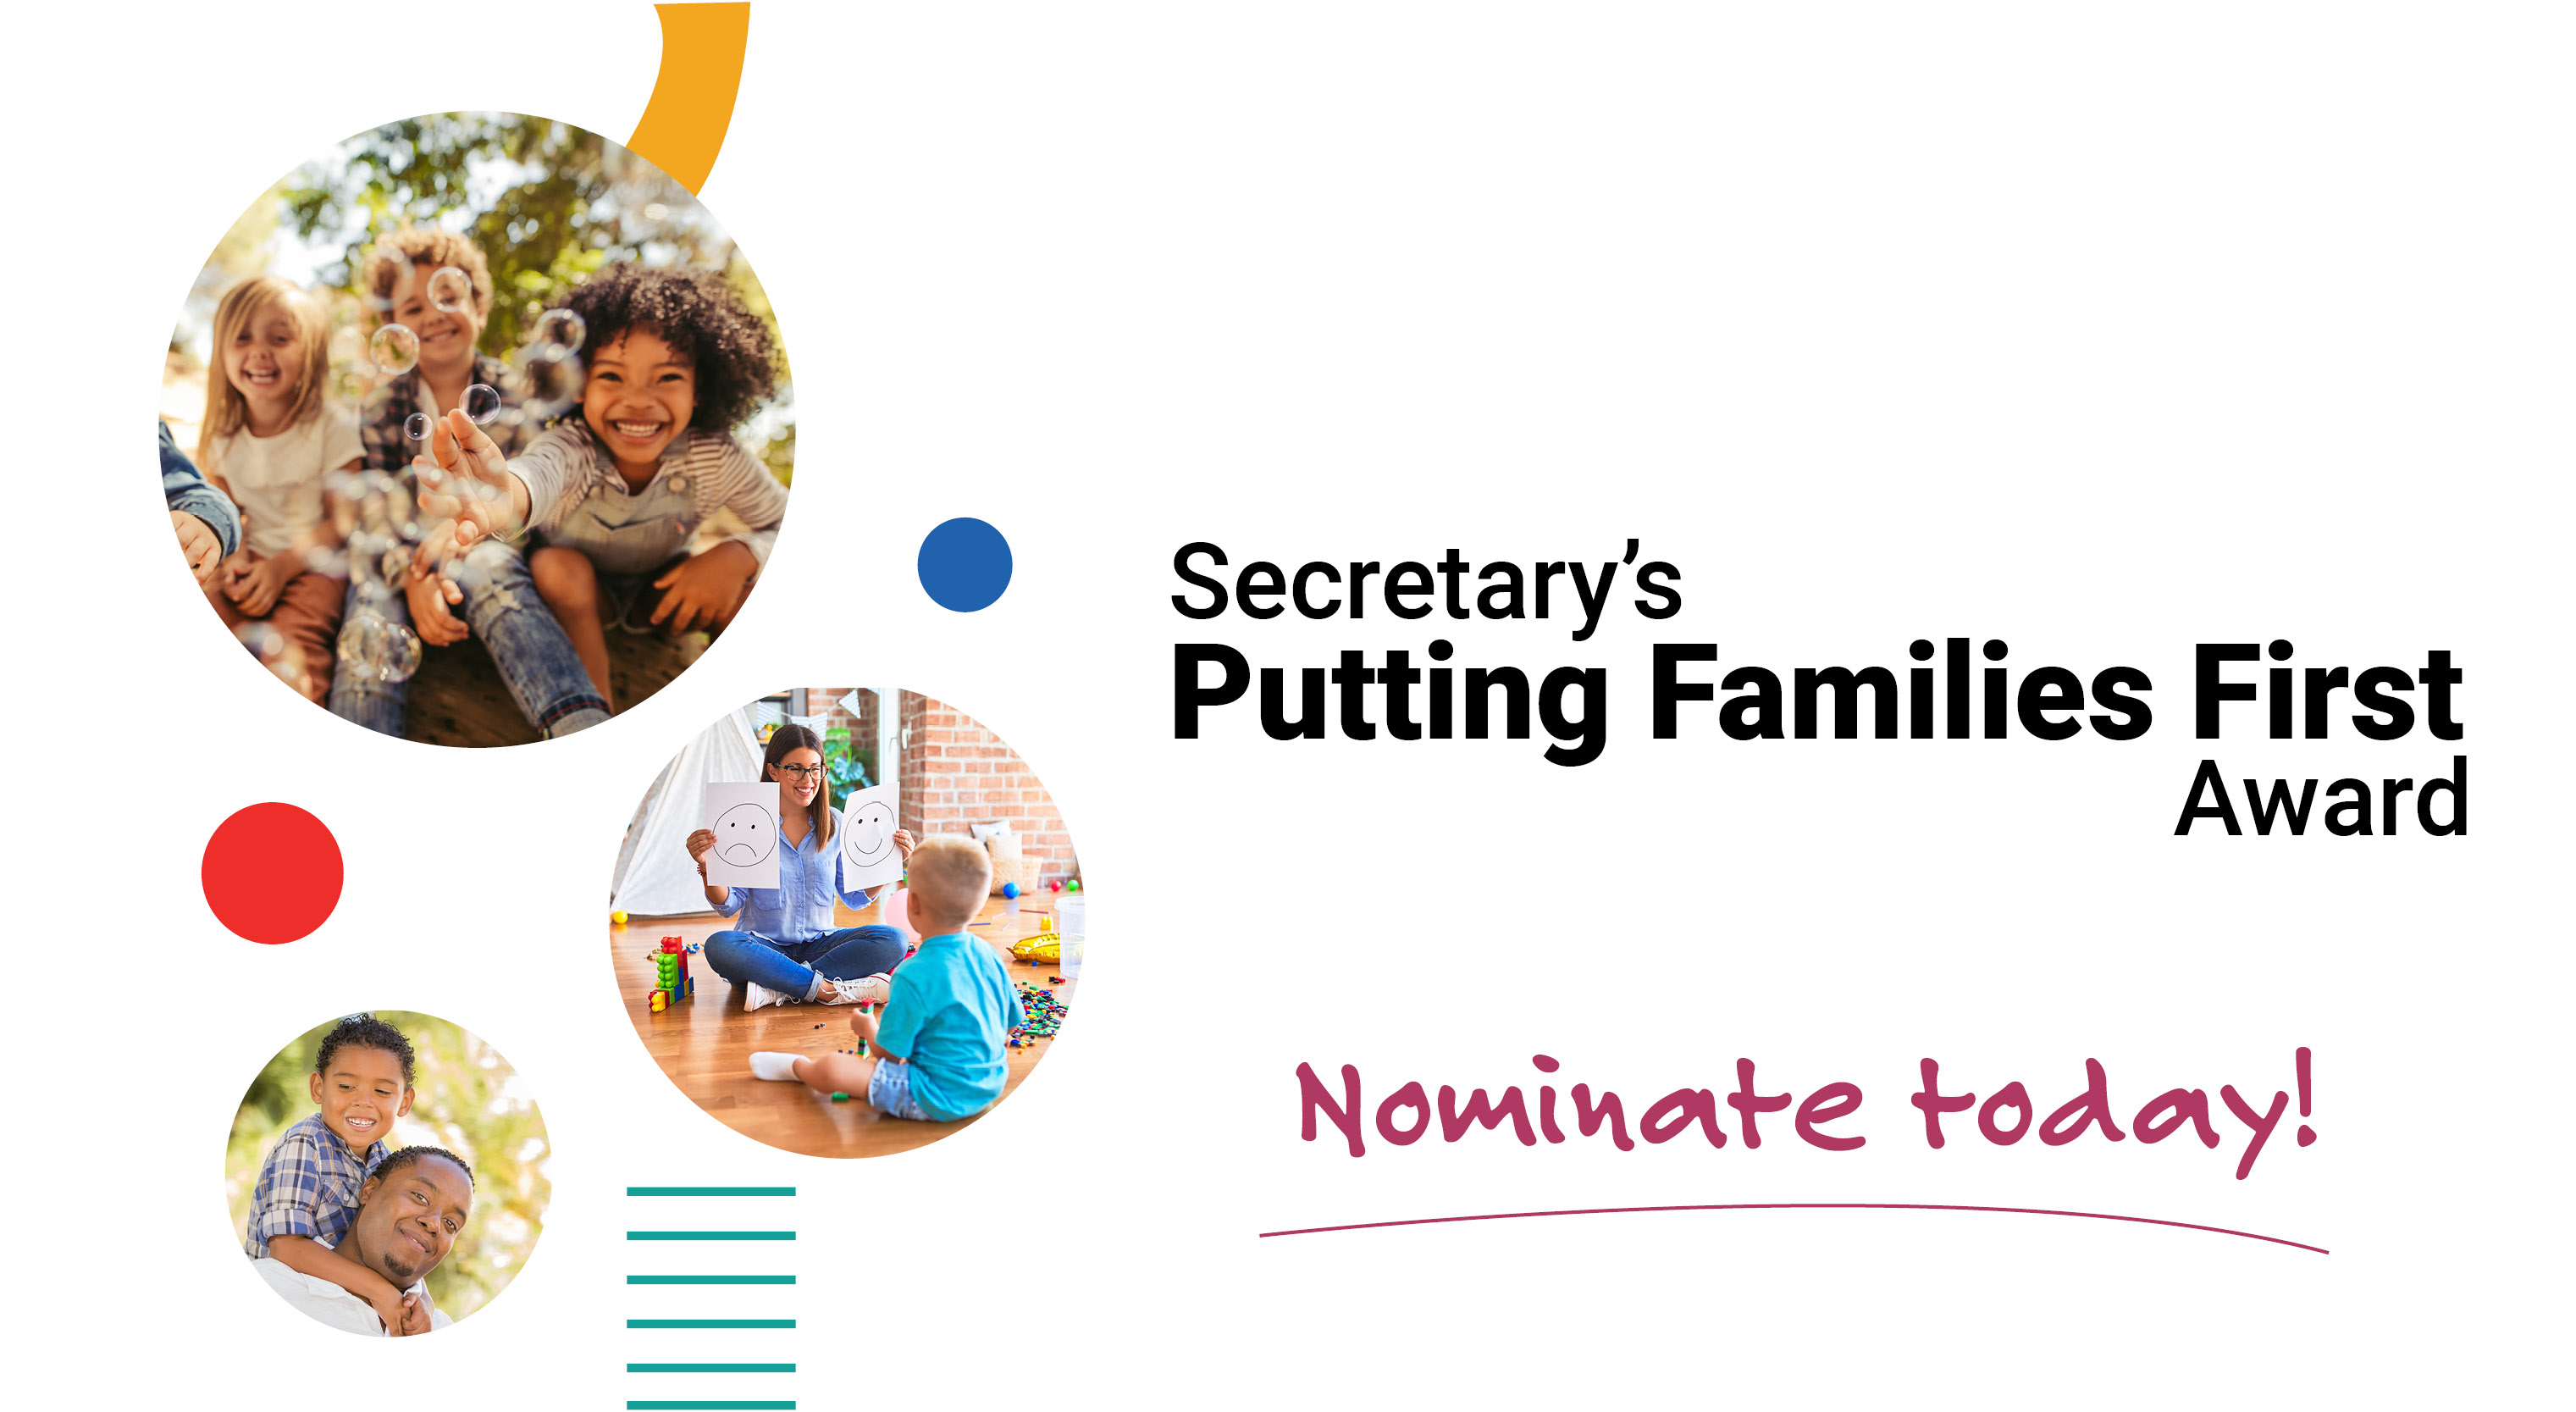 Secretary's Putting Families First Awards graphic